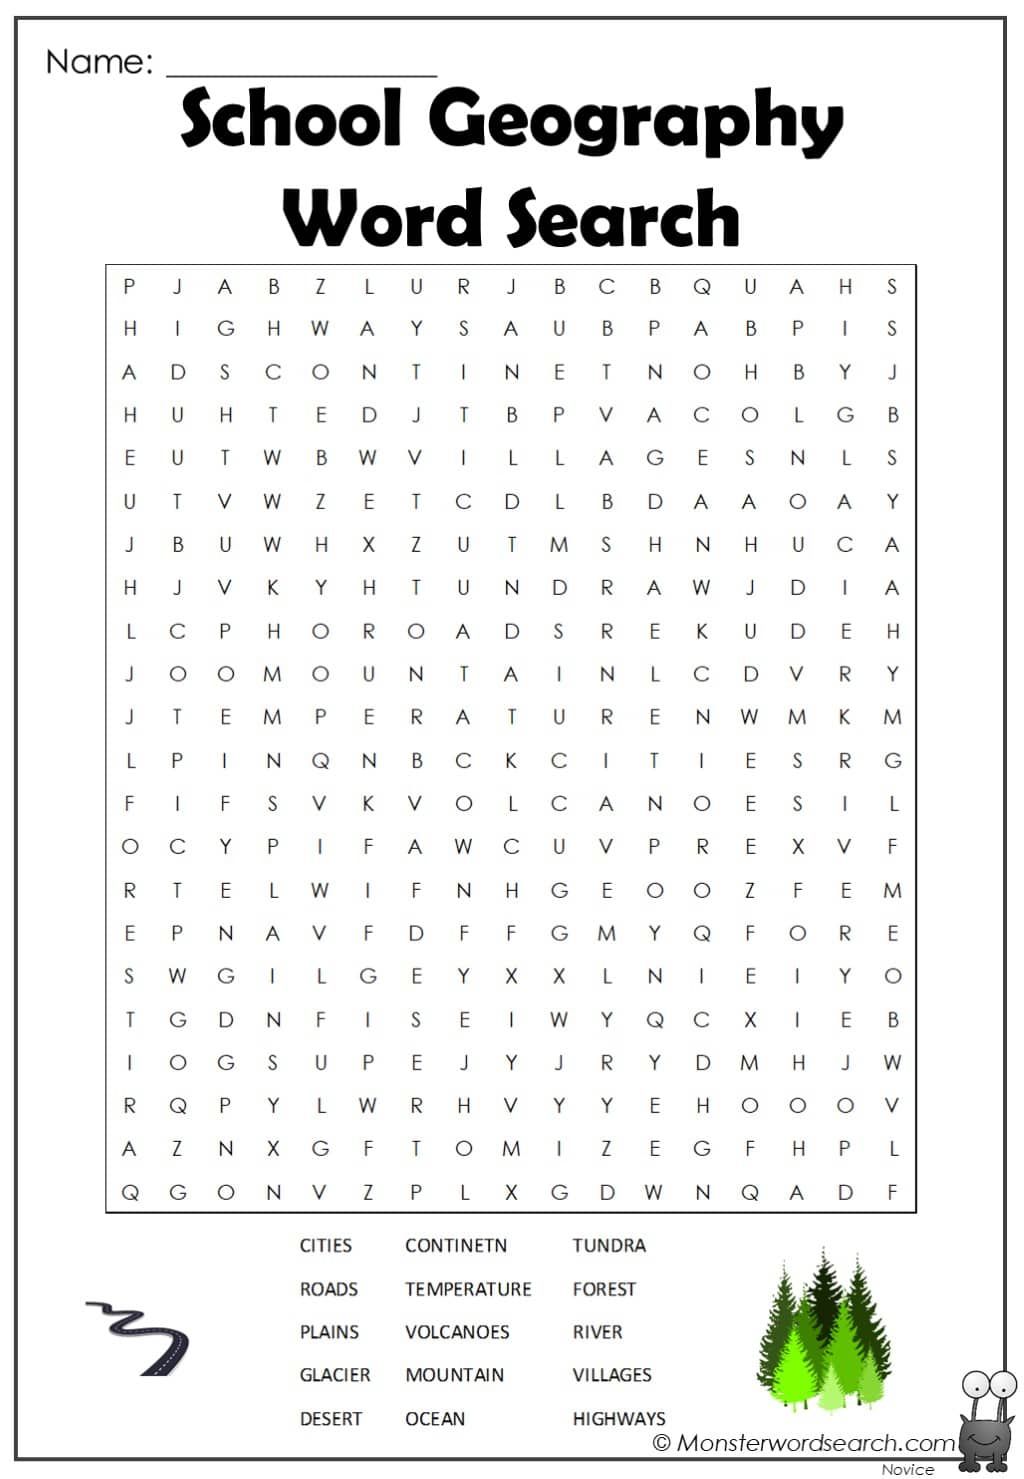 School geography word search free printable word searches school coloring pages word search printables